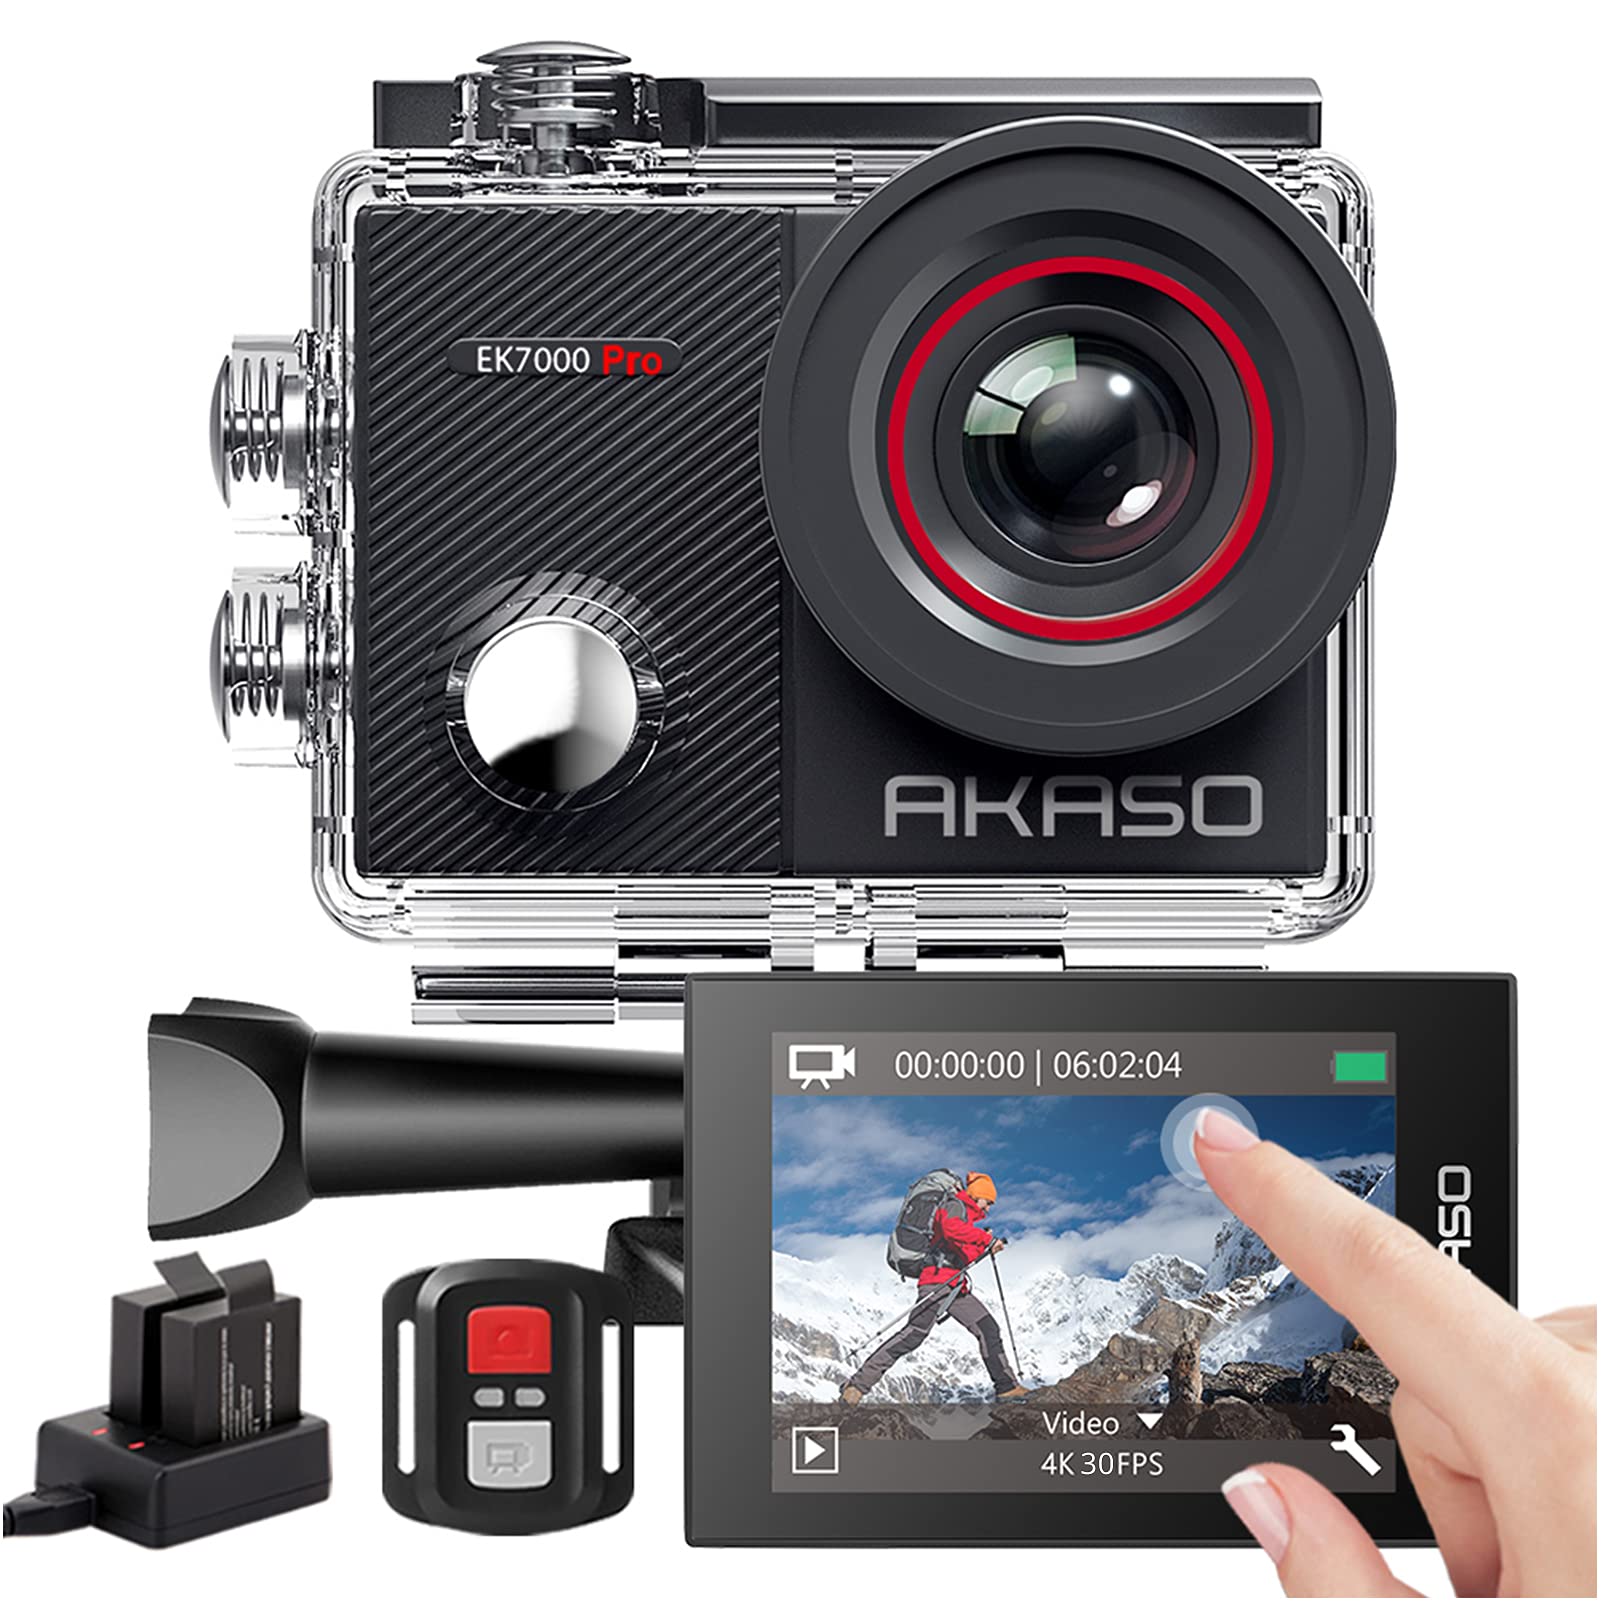 AKASO EK7000 Pro 4K Action Camera - Touch Screen EIS Adjustable View Angle 40m Waterproof Camera Remote Control Sports Camera with Helmet Accessories Kit